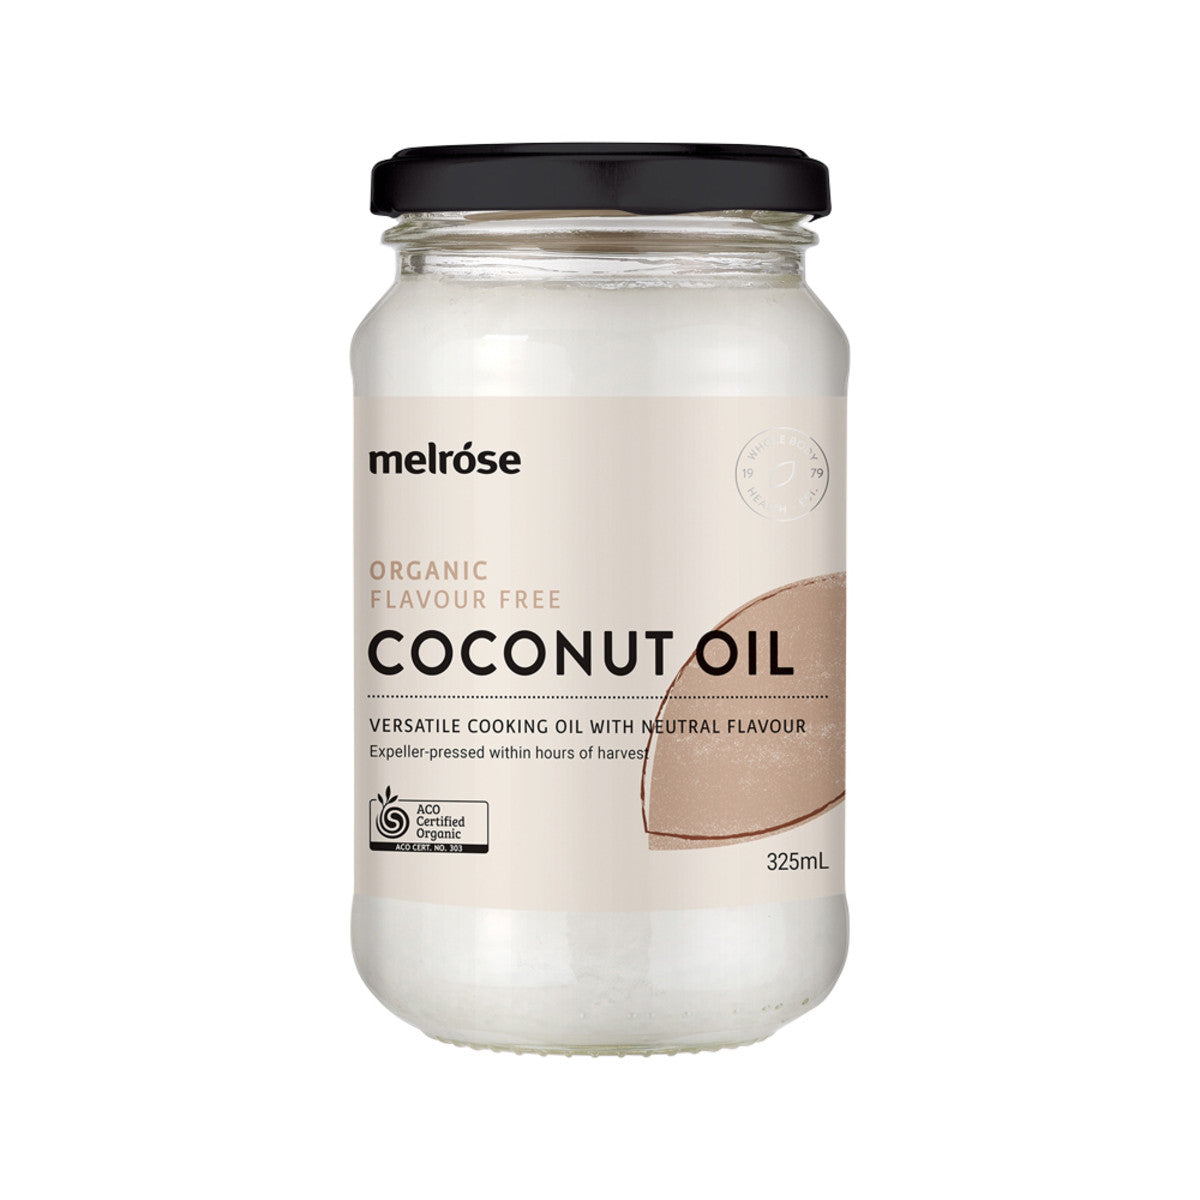 Melrose Organic Coconut Oil Flavour Free 325ml-The Living Co.